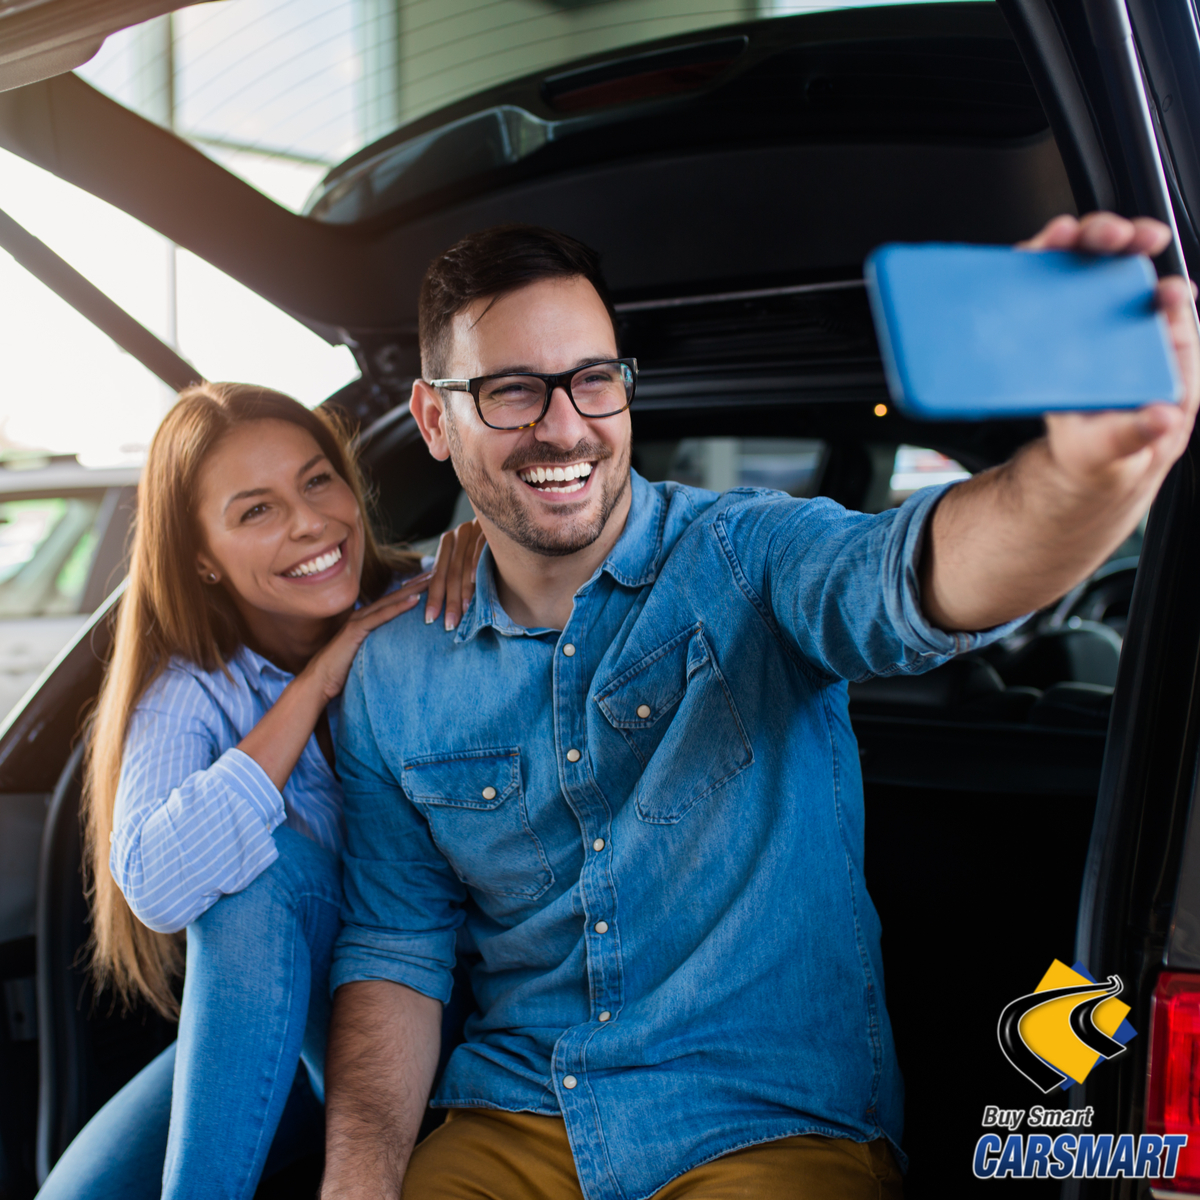 Are You Looking For Auto Loans Near Washington, DC?